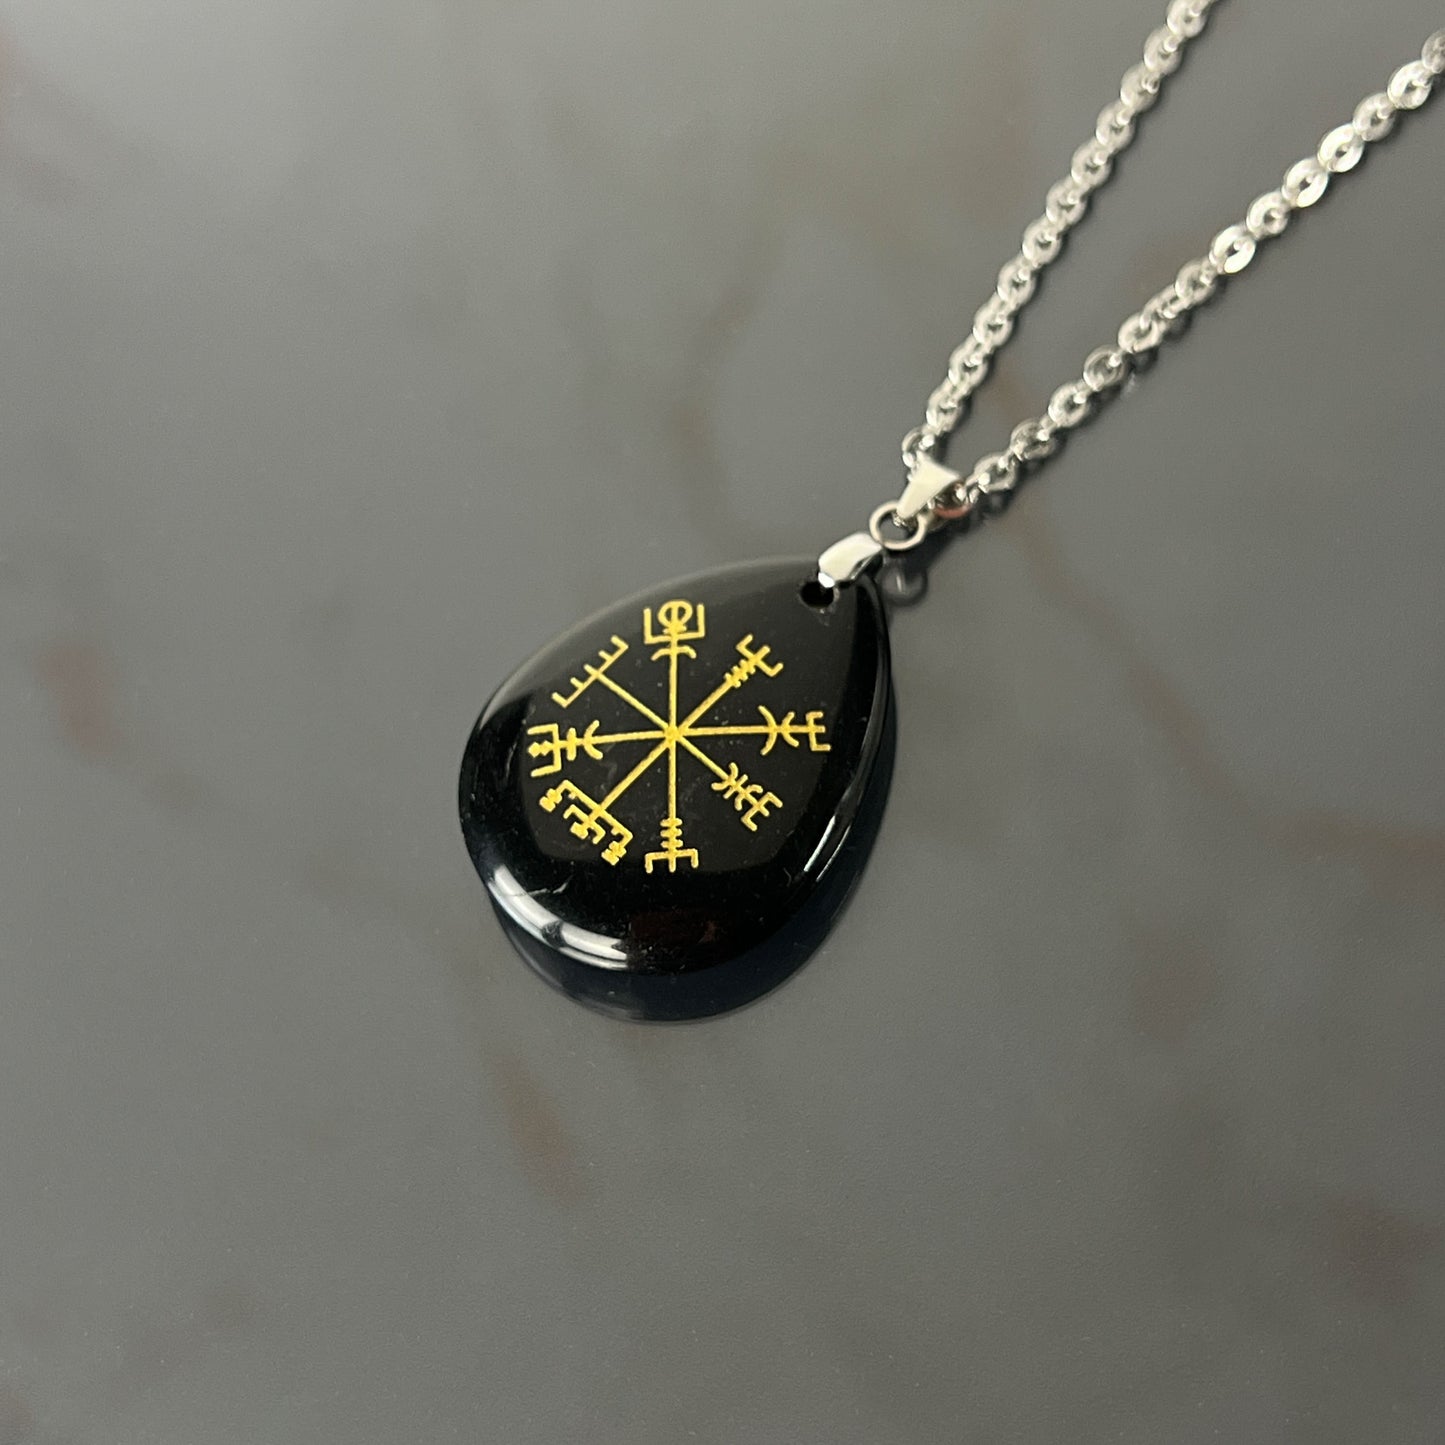 Vegvisir Viking compass amulet necklace, onyx and stainless steel